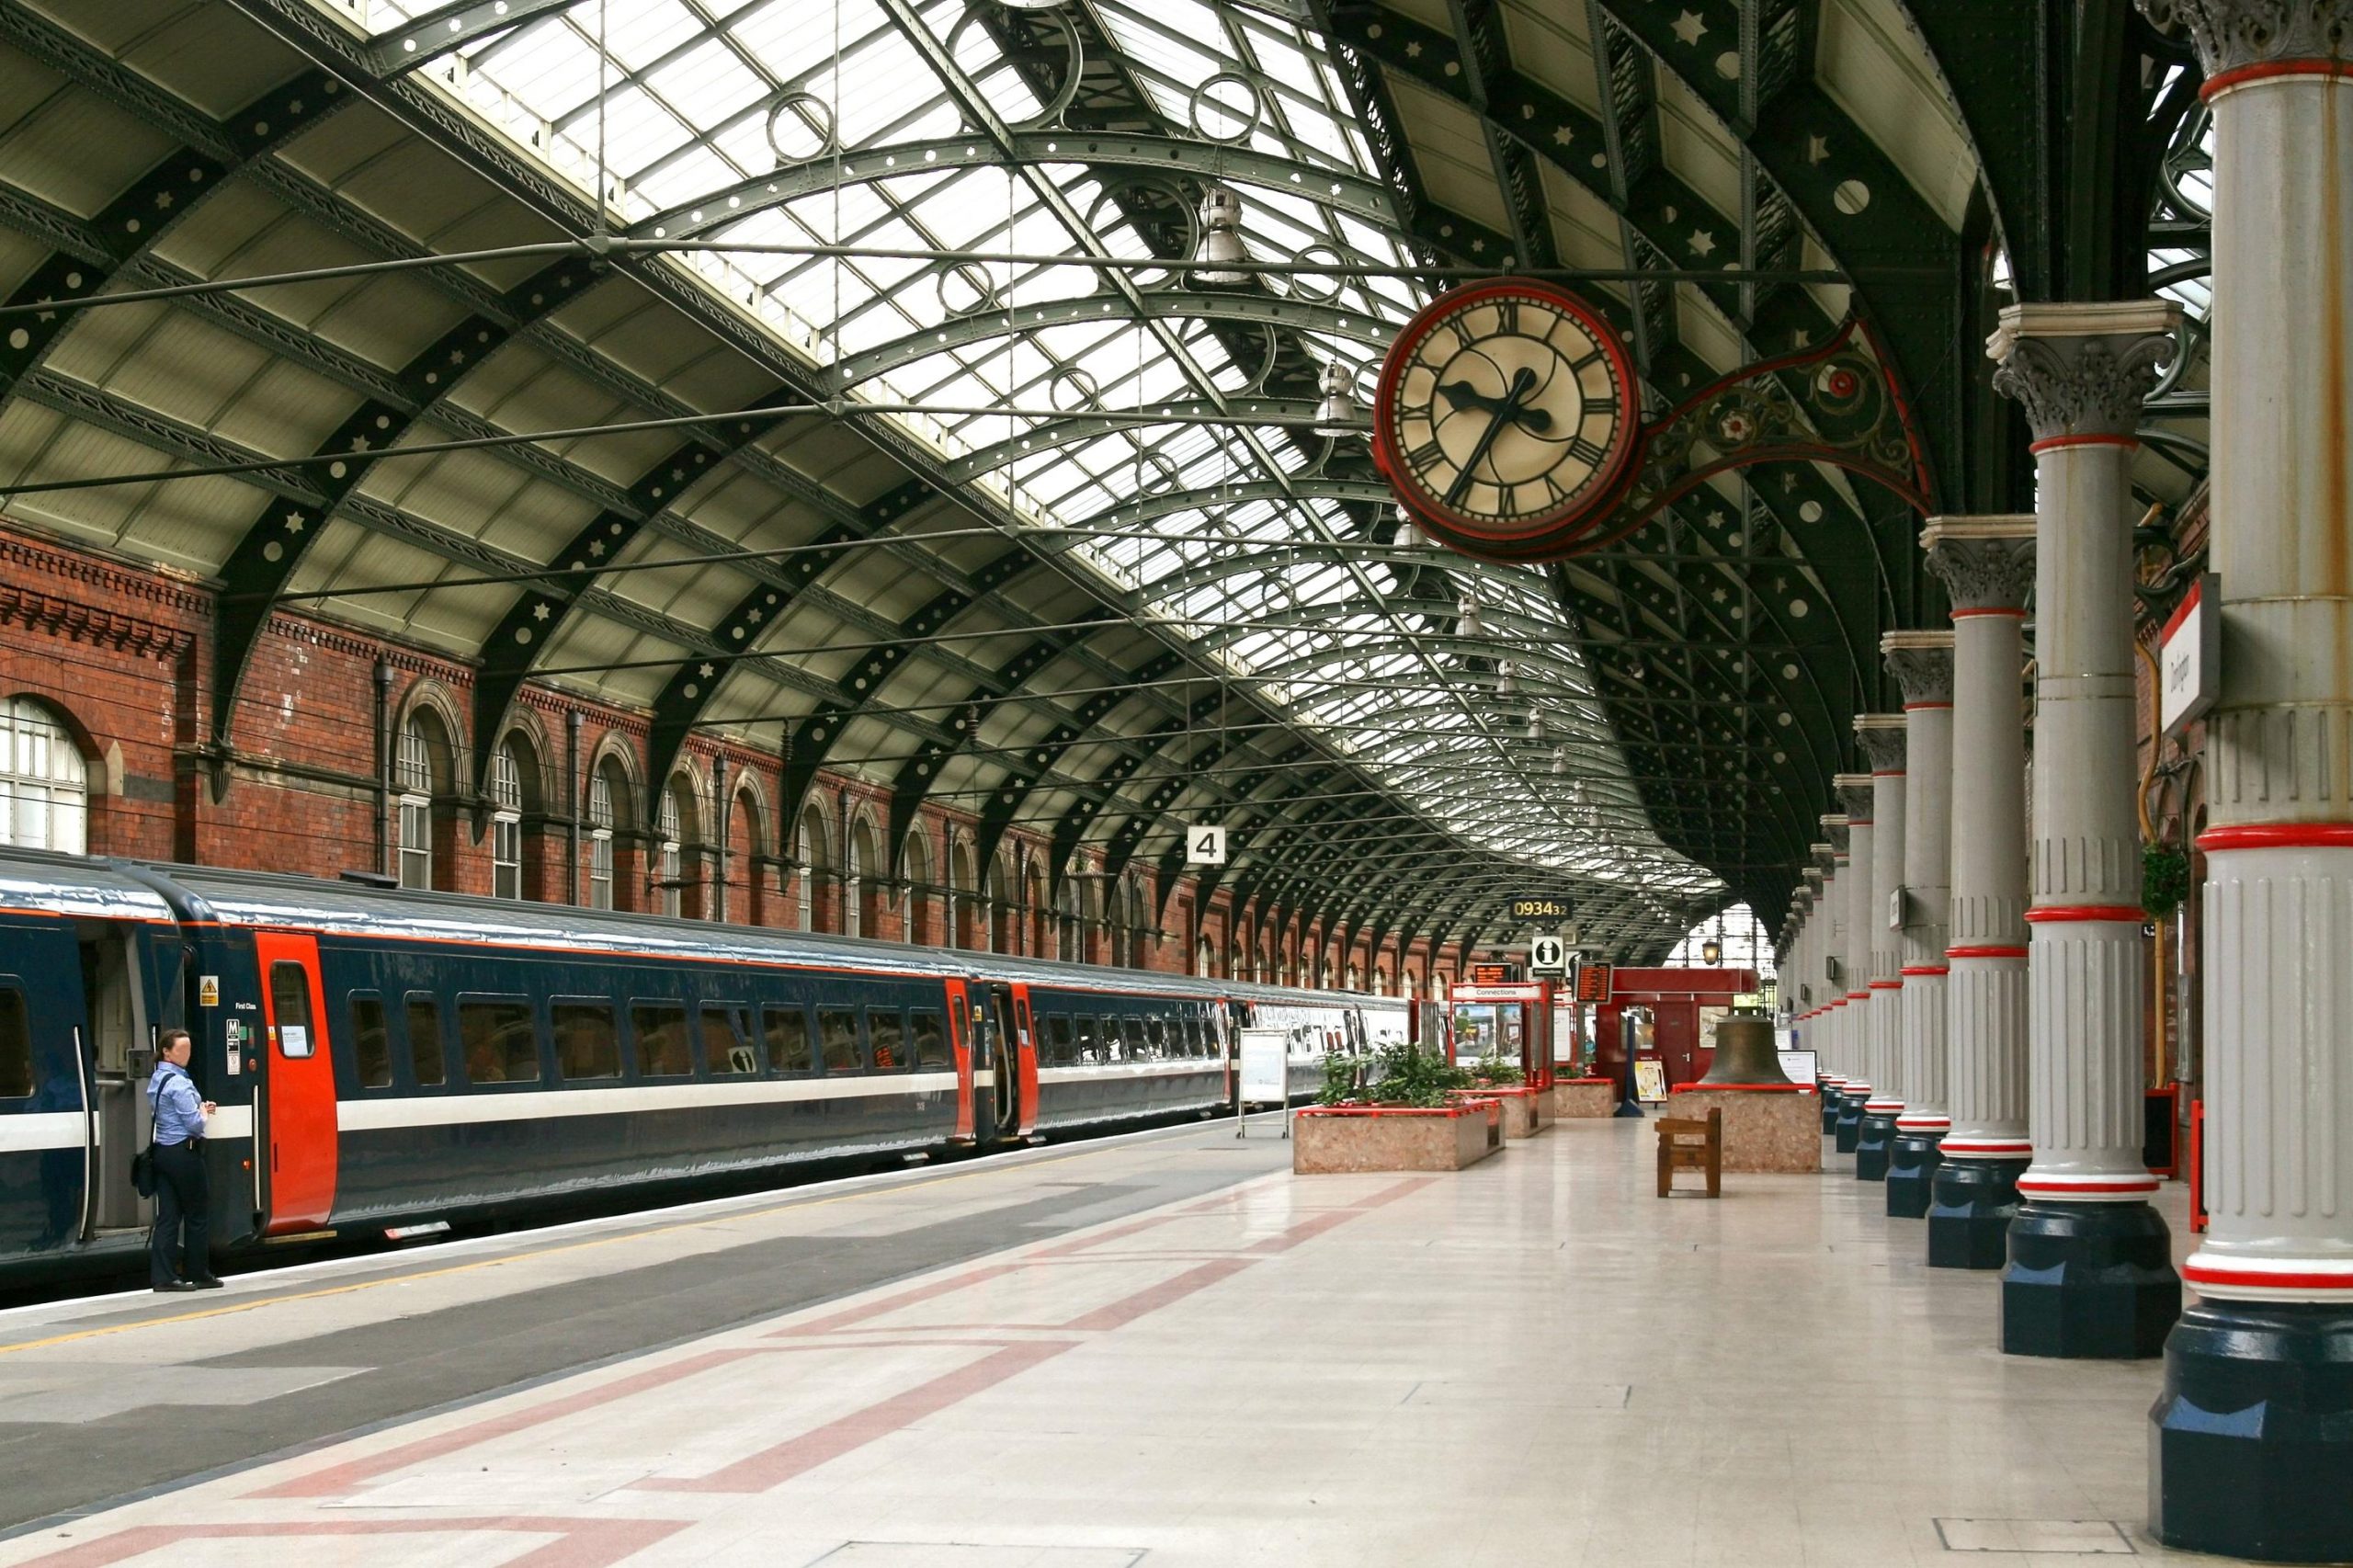 Get tp the station on time with Allied Taxis of Buxton